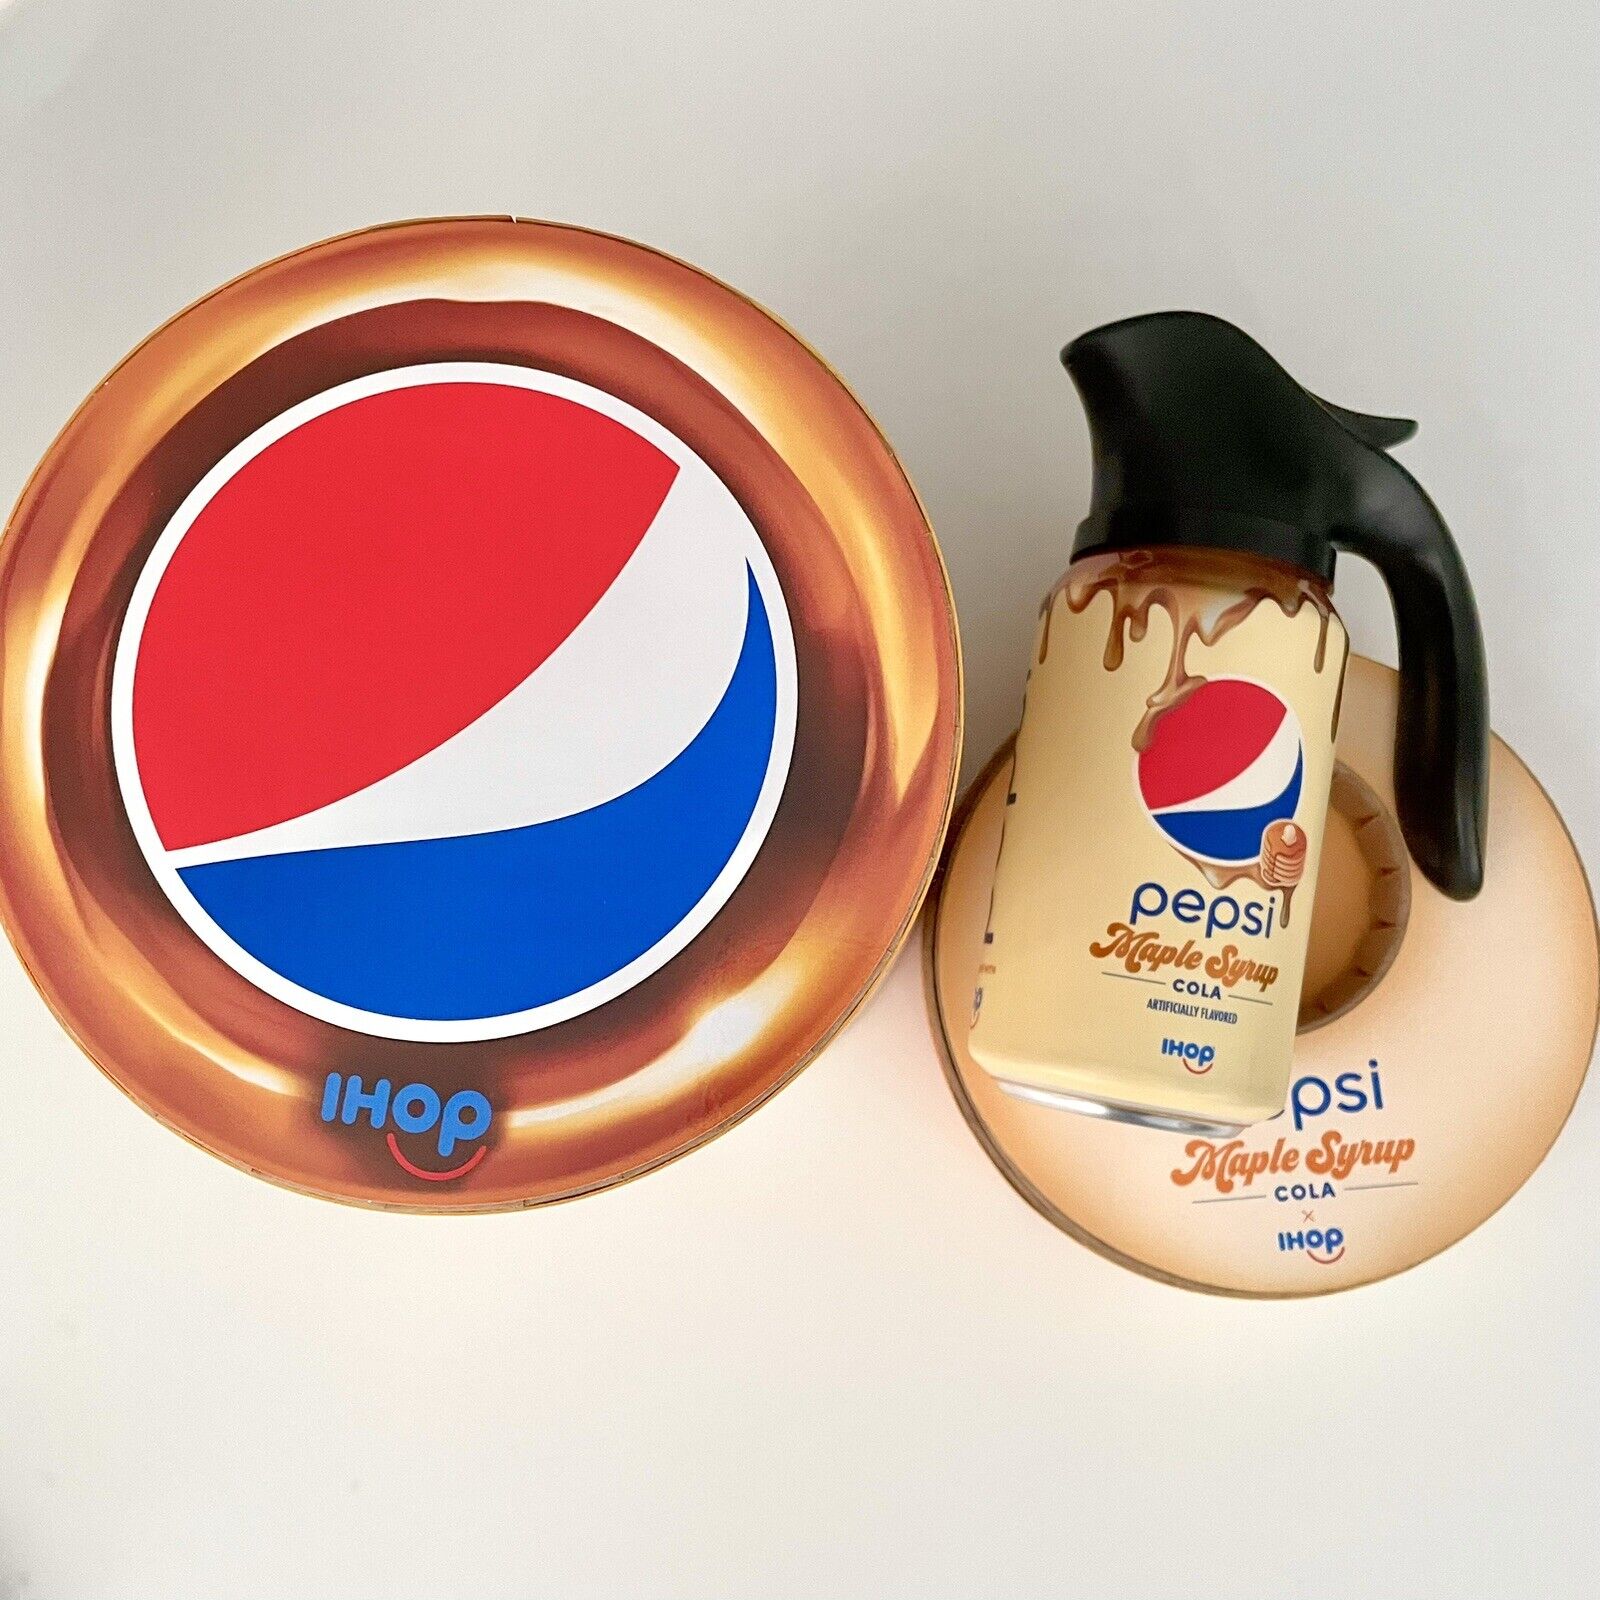 Pepsi Maple Syrup Cola With SPOUT x IHOP Collab Limited Edition VERY RARE